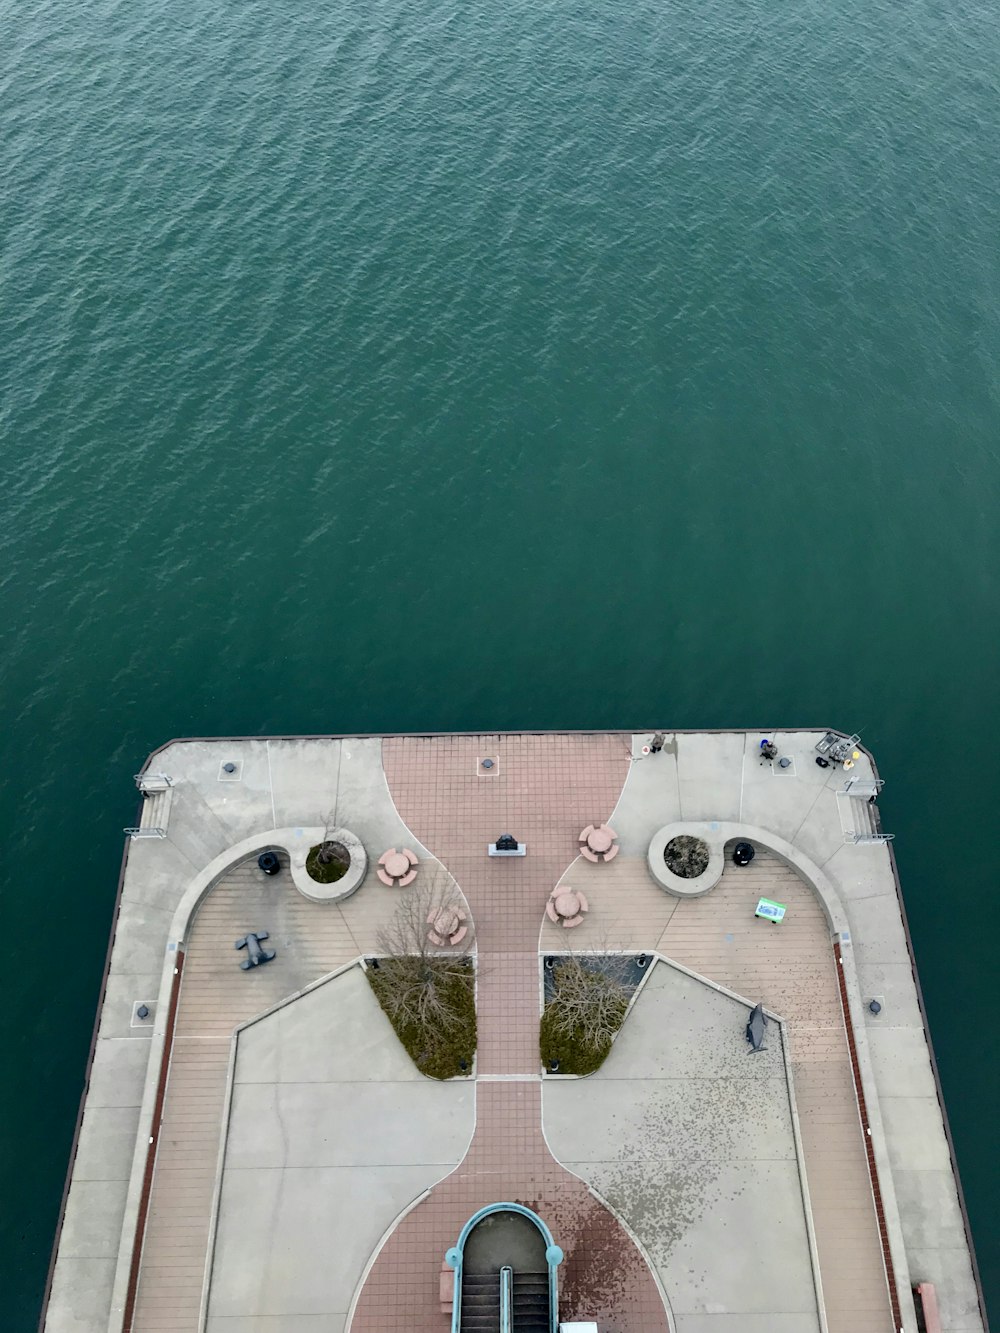 aerial view of deck on body of water